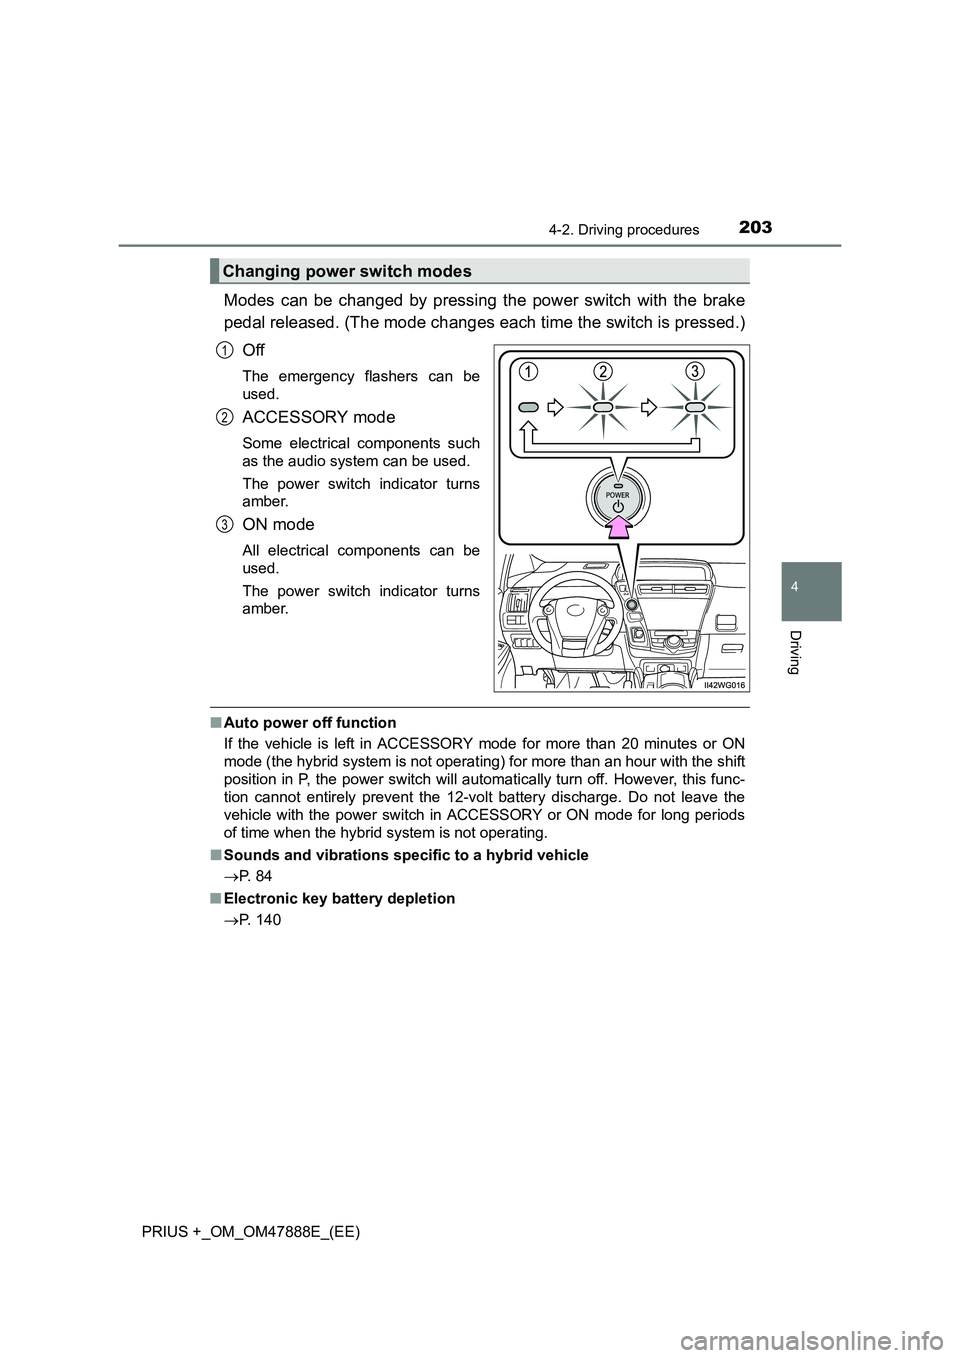 TOYOTA PRIUS PLUS 2014  Owners Manual 2034-2. Driving procedures
4
Driving
PRIUS +_OM_OM47888E_(EE)
Modes can be changed by pressing the power switch with the brake
pedal released. (The mode changes each time the switch is pressed.)Off
Th